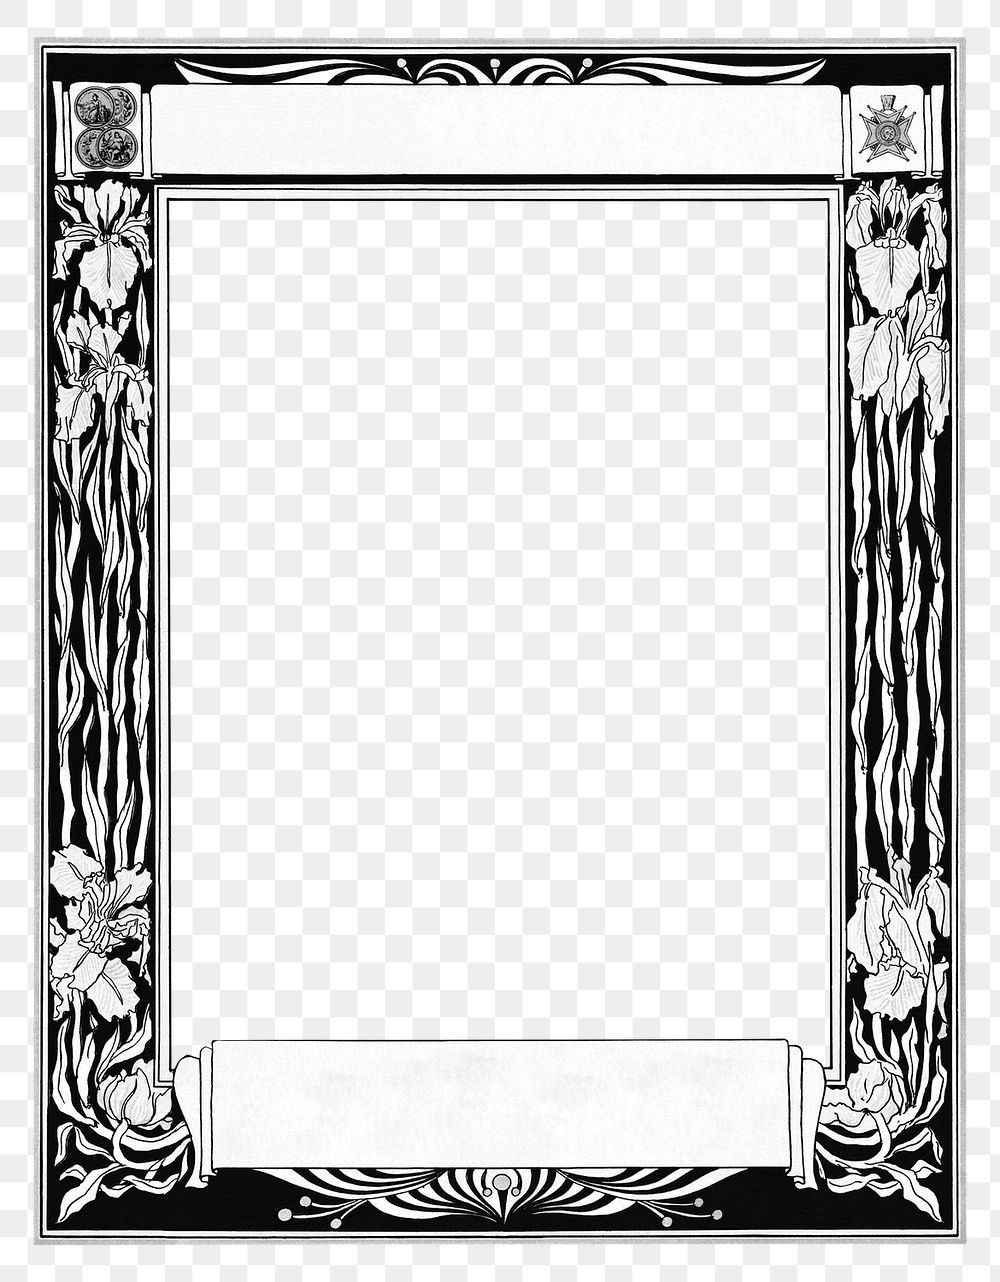 Frame png with vintage black floral border, remixed from the artworks by Johann Georg van Caspel